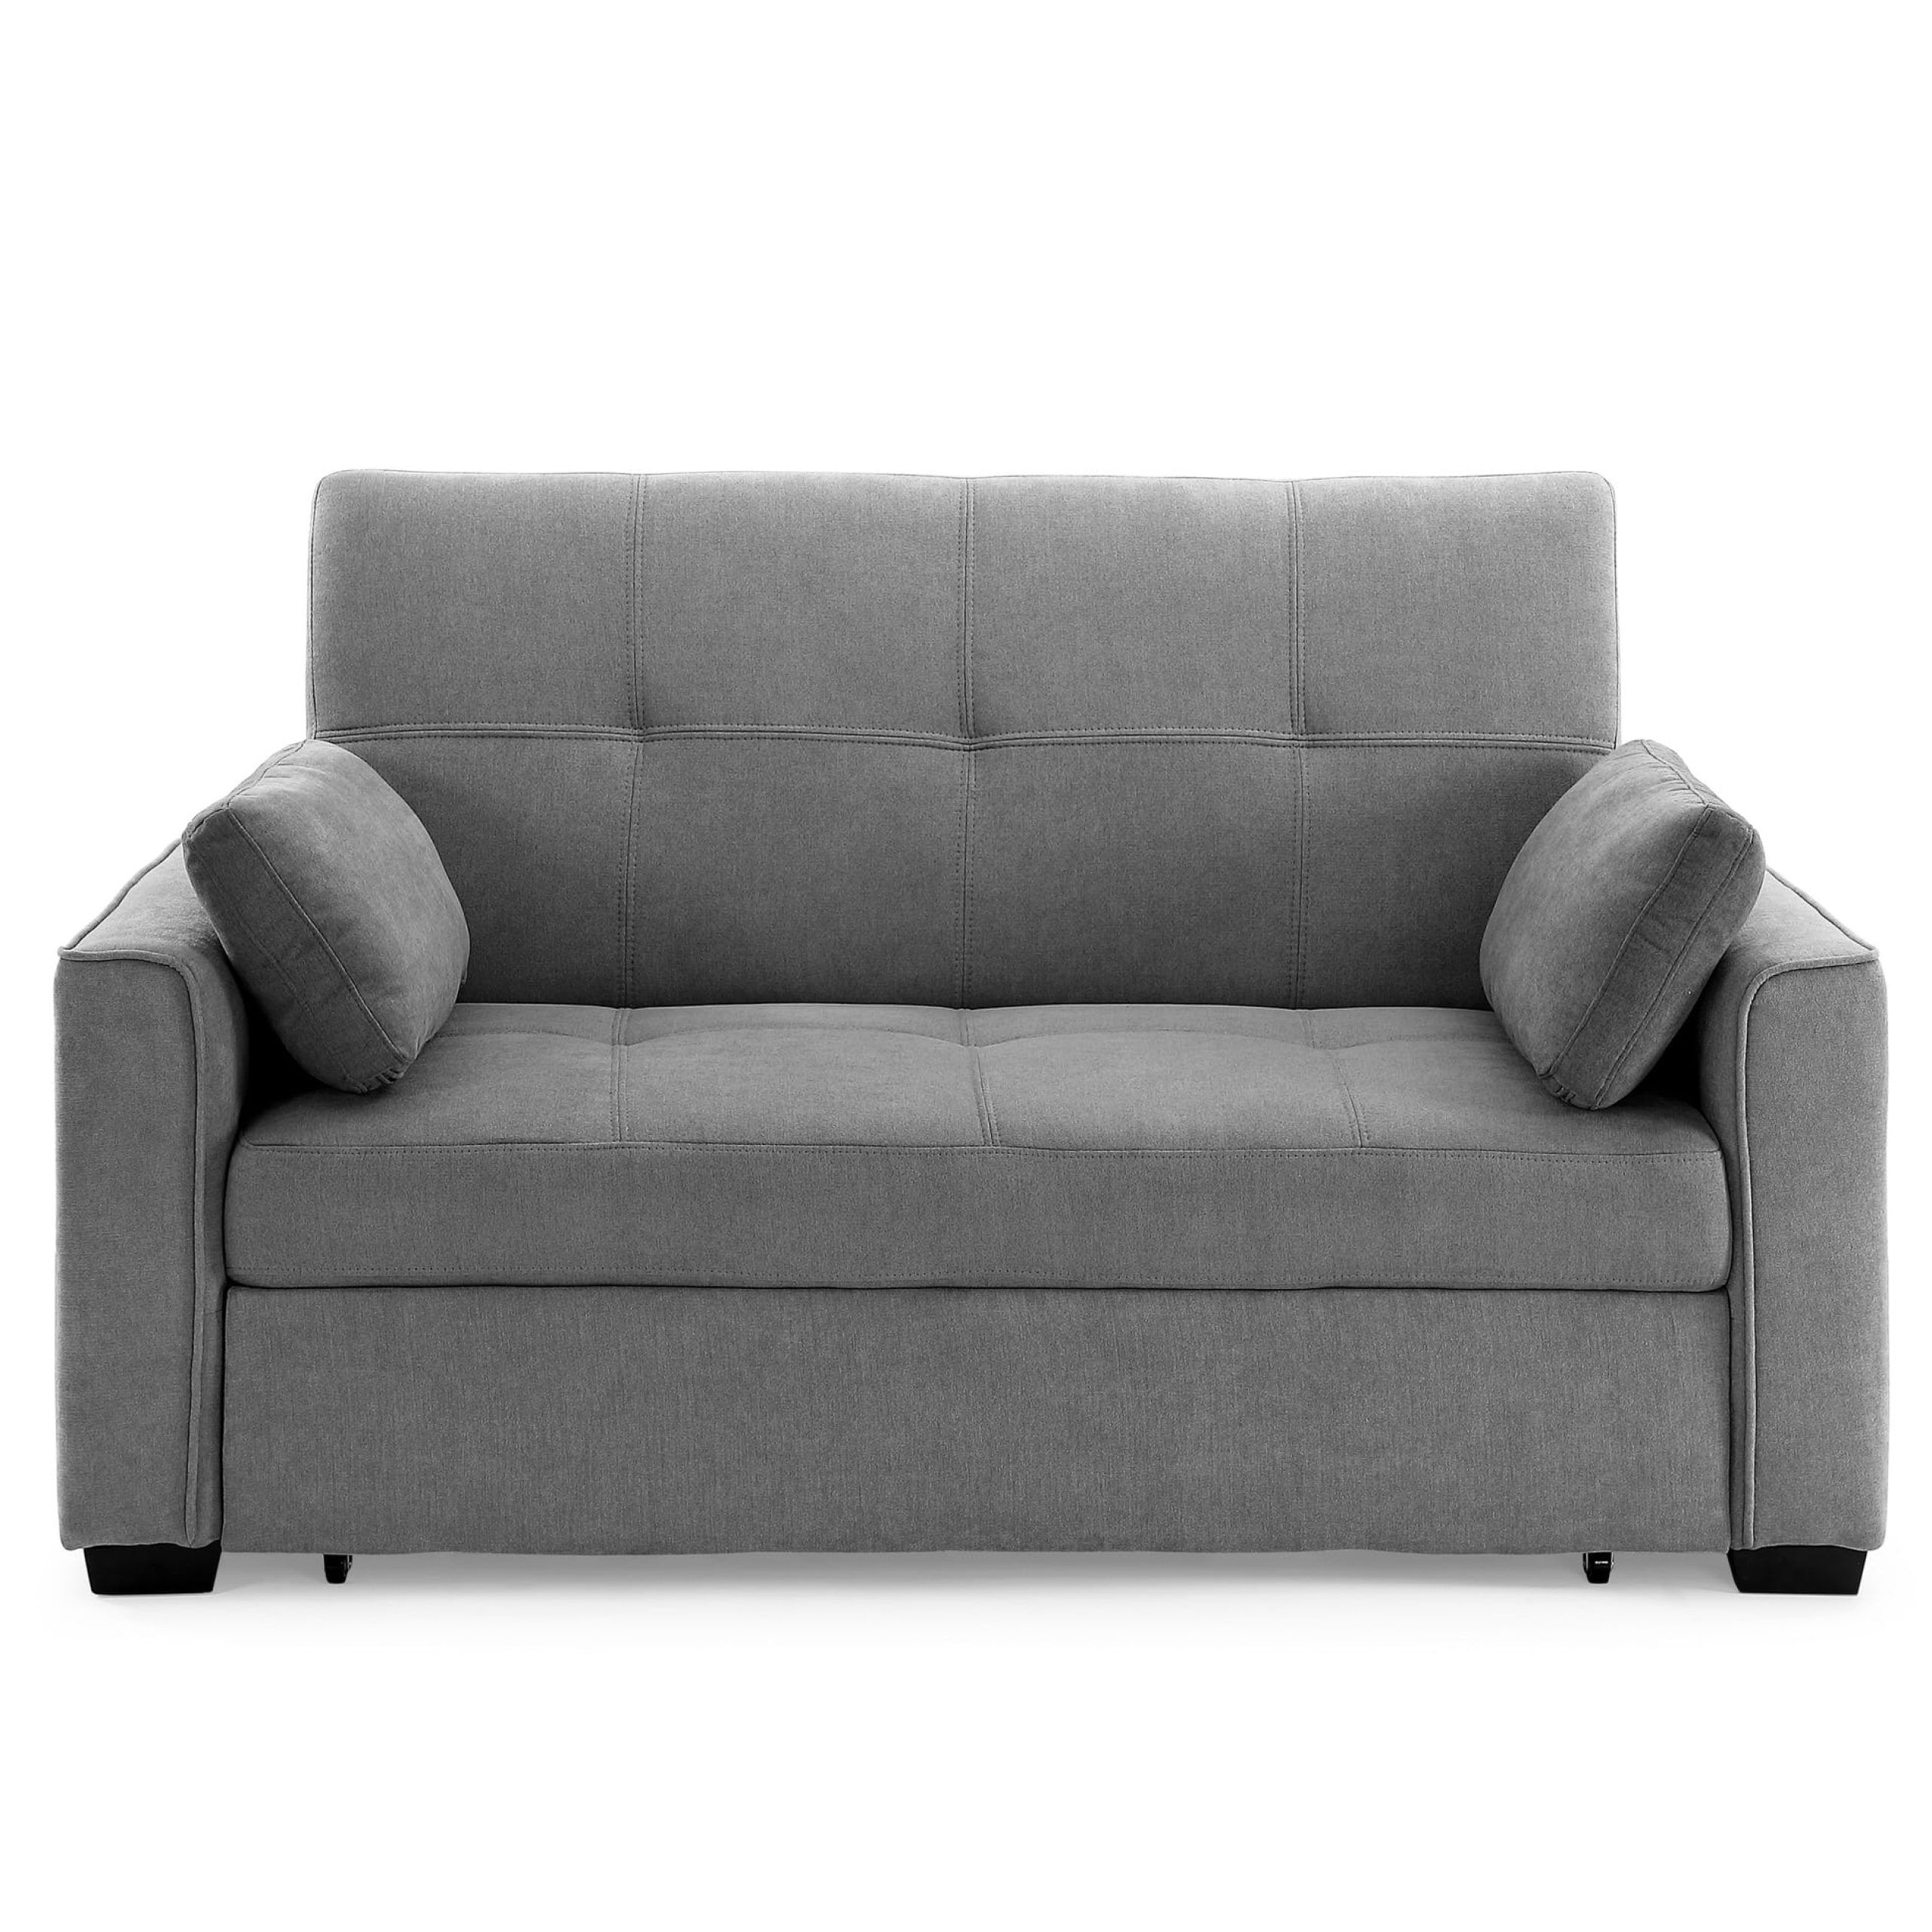 Nantucket Loveseat Full Size Sleeper Light Graynight & Day Furniture For Convertible Gray Loveseat Sleepers (View 9 of 15)